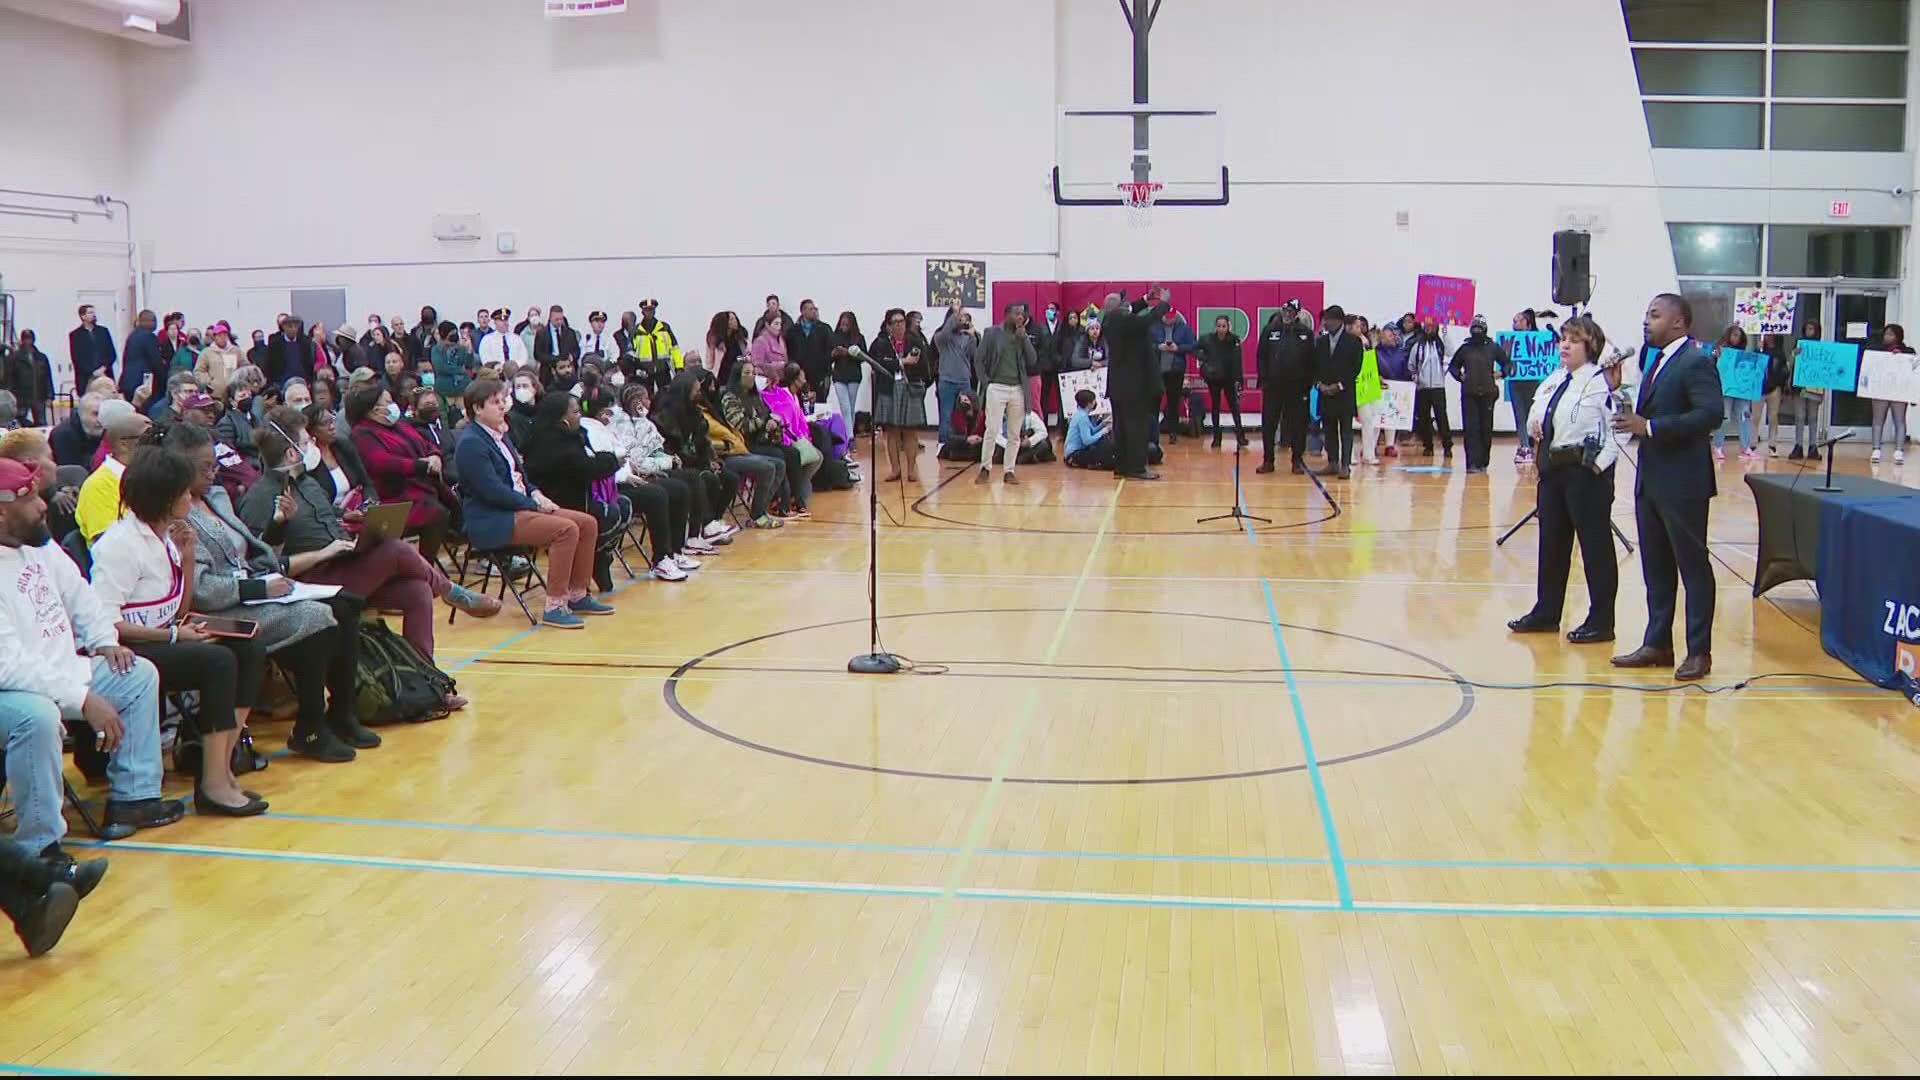 Hundreds of people gathered in Northeast D.C. to discuss the fatal shooting of 13-year-old Karon Blake.